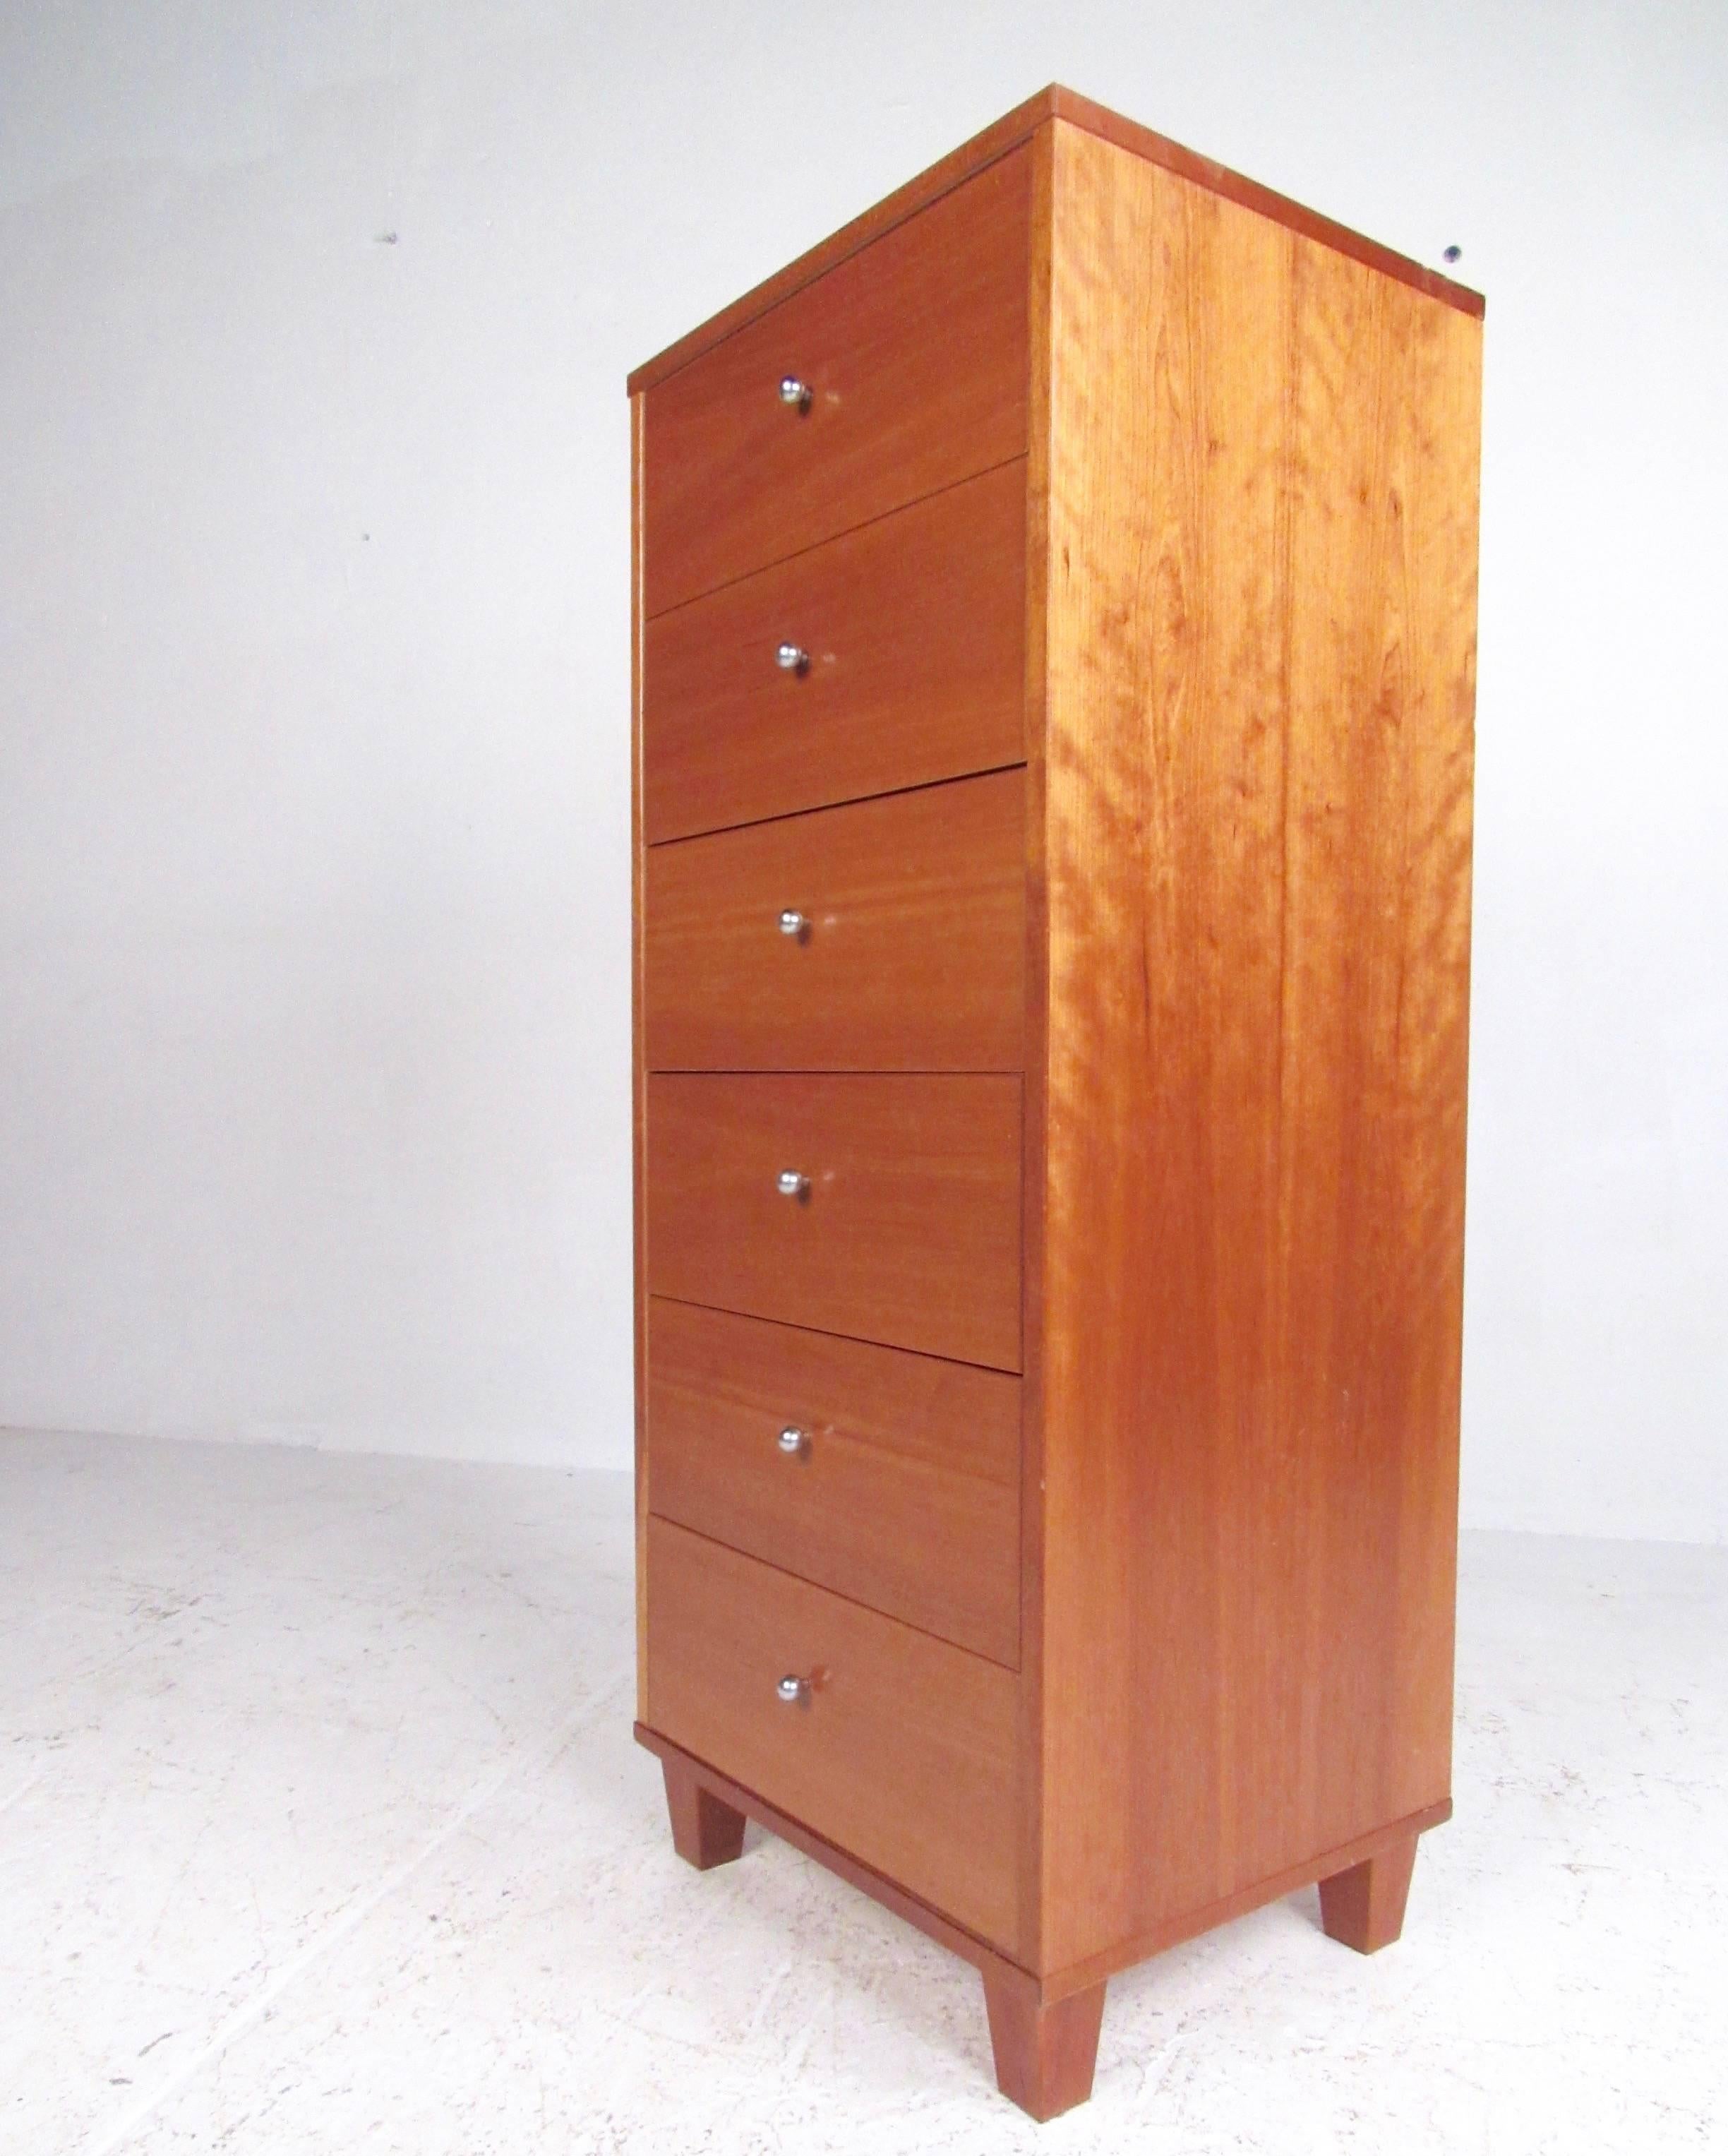 This stylish modern lingerie chest features Danish teak finish, and six spacious drawers for versatile bedroom storage. Steel ball drawer pulls add to the unique Scandinavian Modern appeal of this tall chest of drawers. Please confirm item location